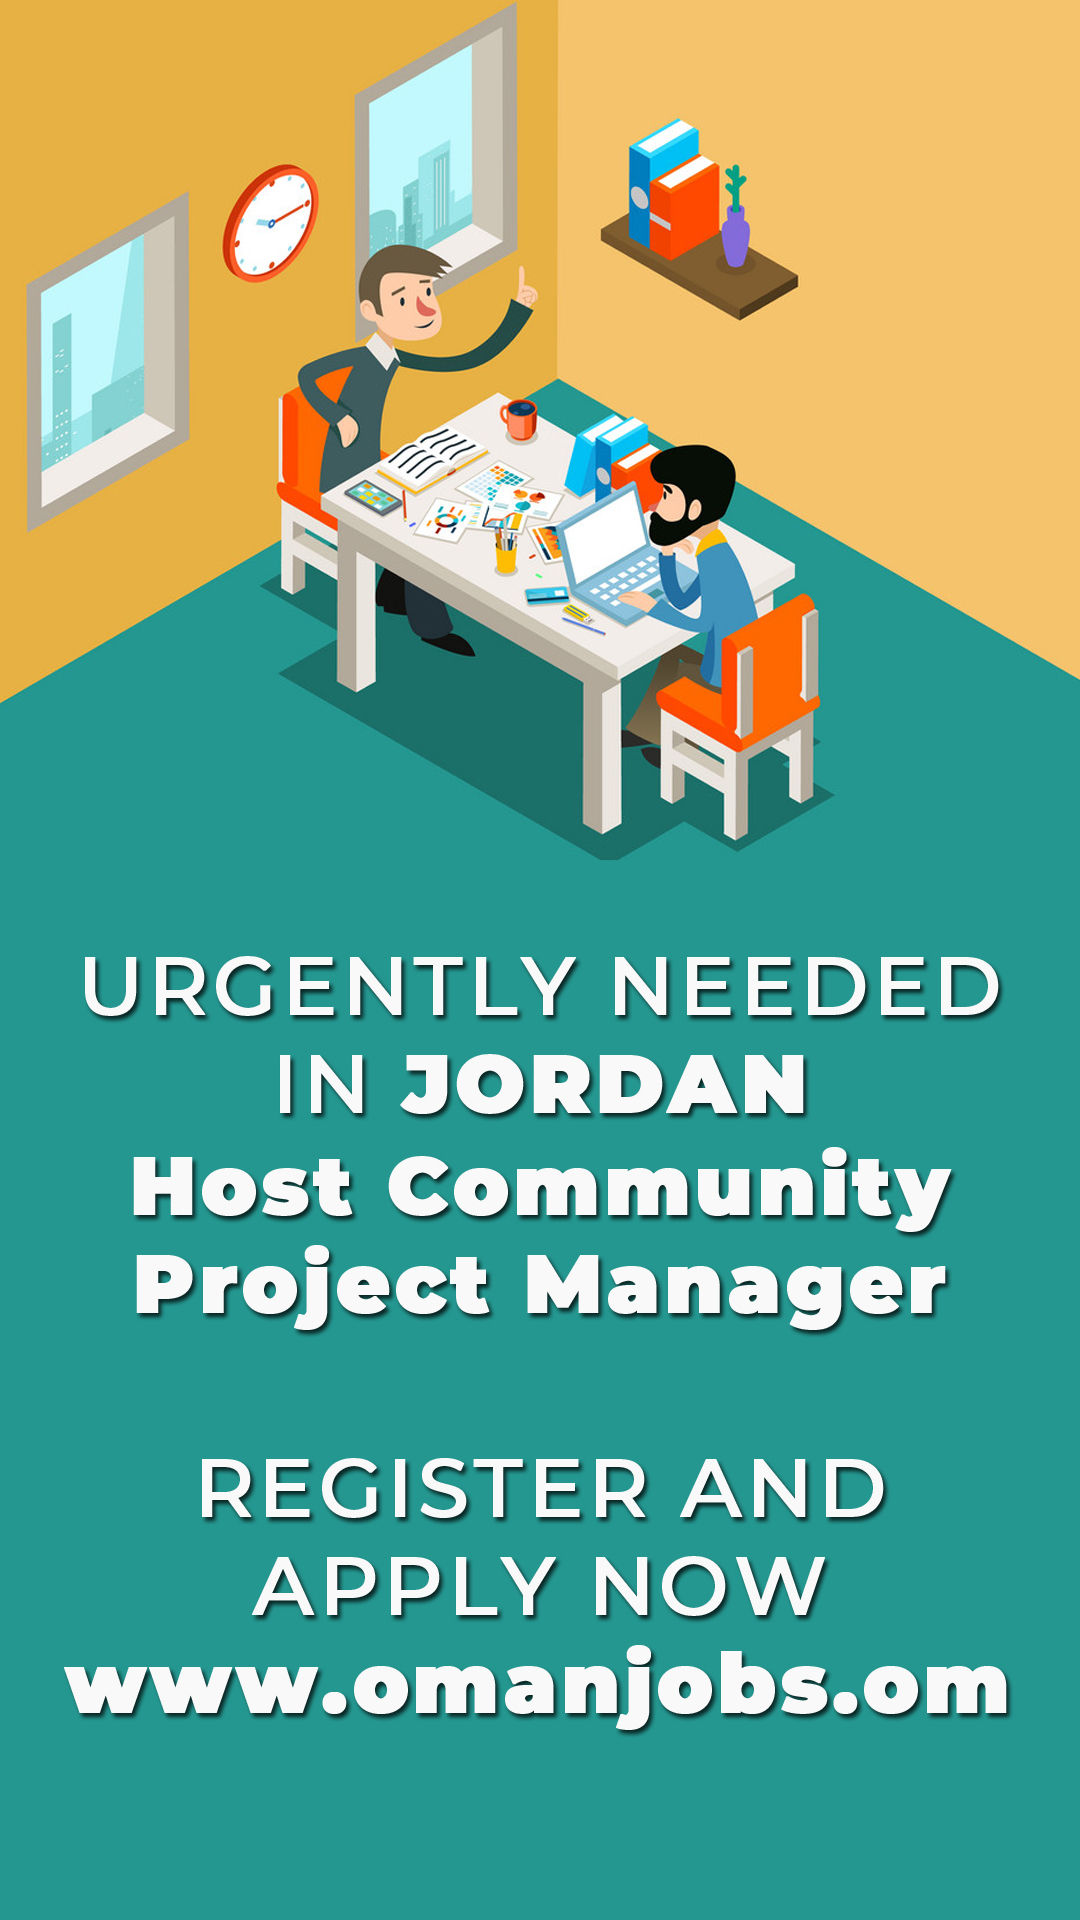 Hiring Host Community Project Manager